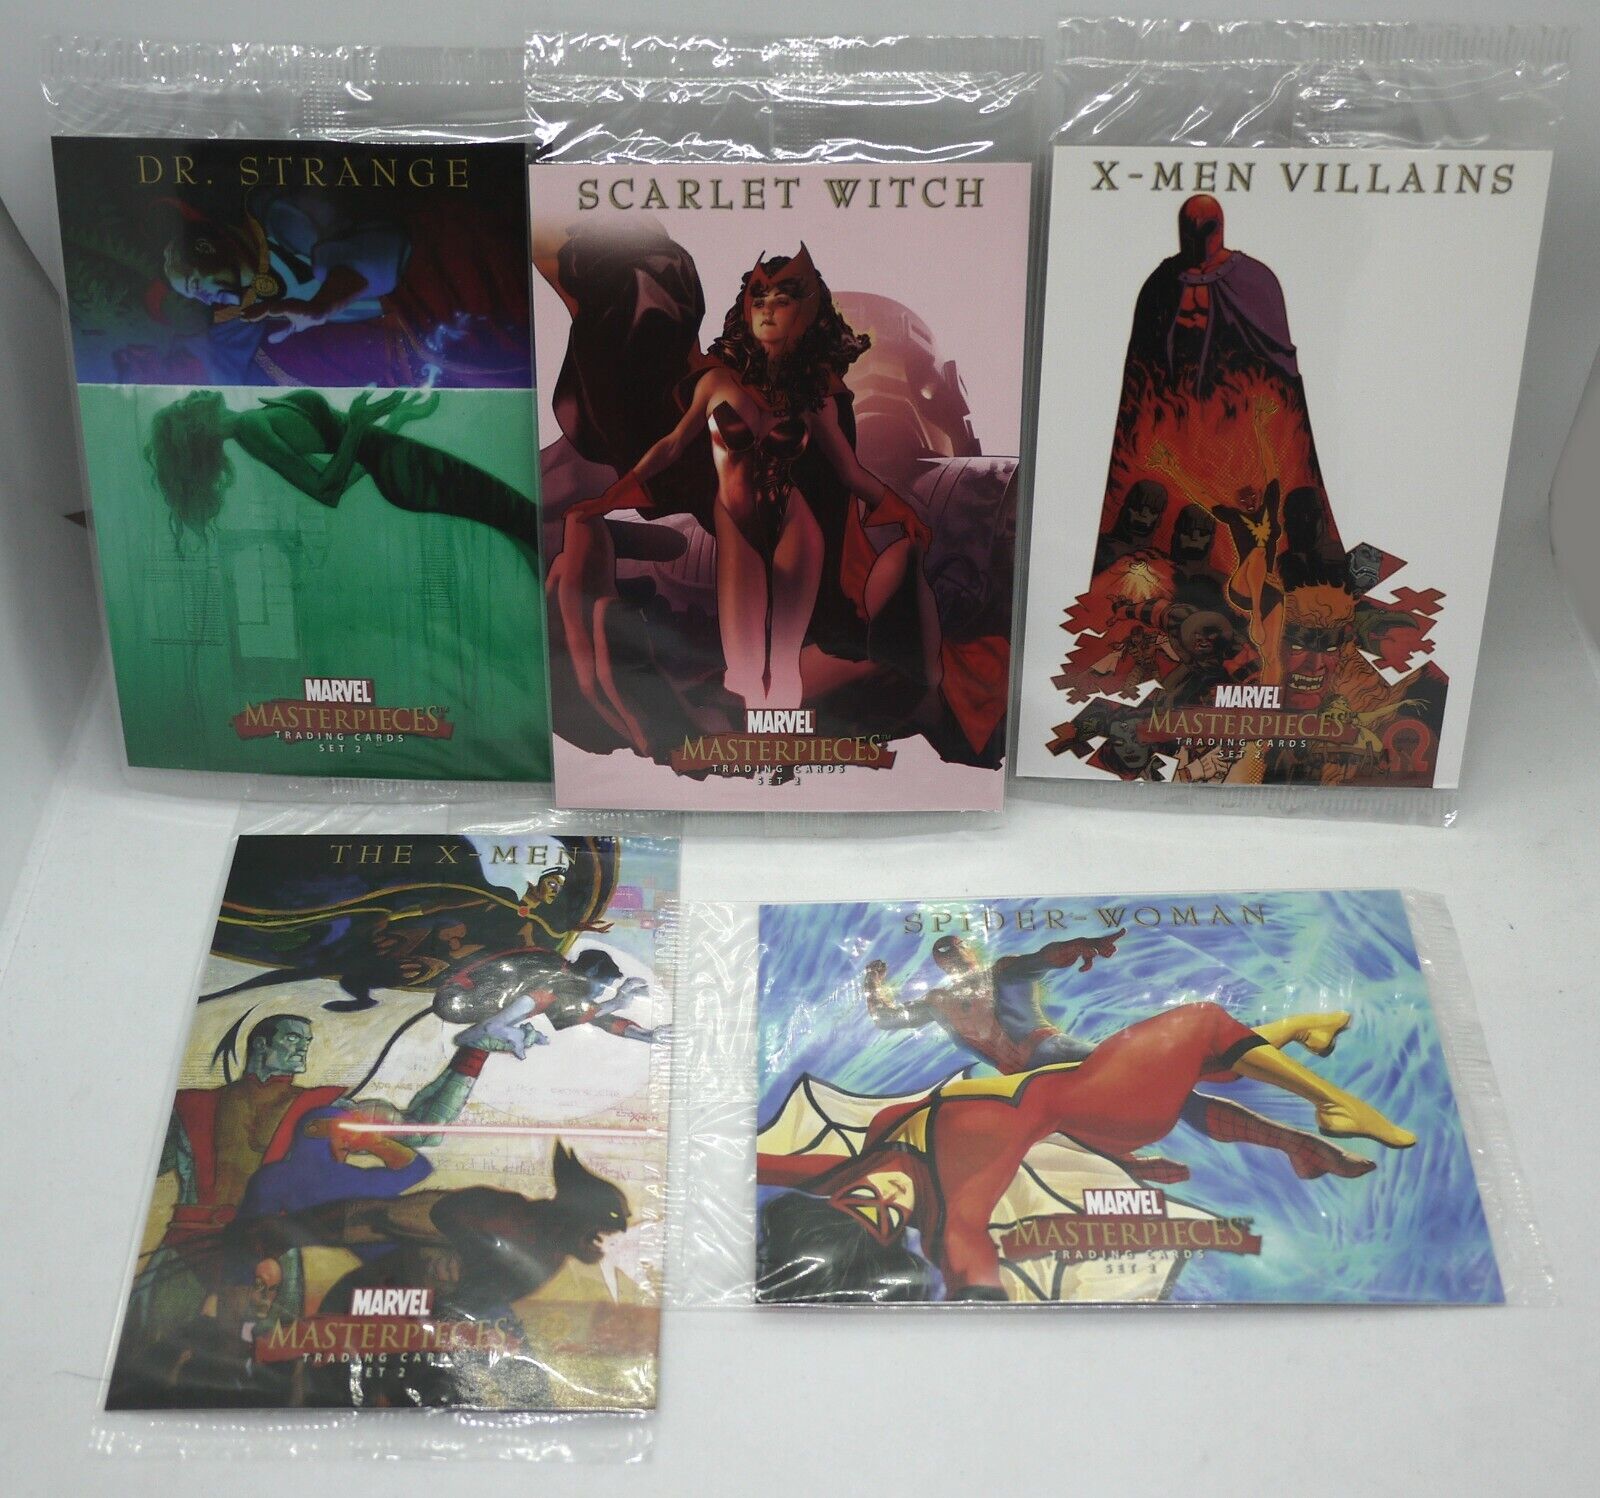 2008 UD/SKYBOX MARVEL MASTERPIECES 2 (5 SEALED CARDS) BOX TOPPER SET